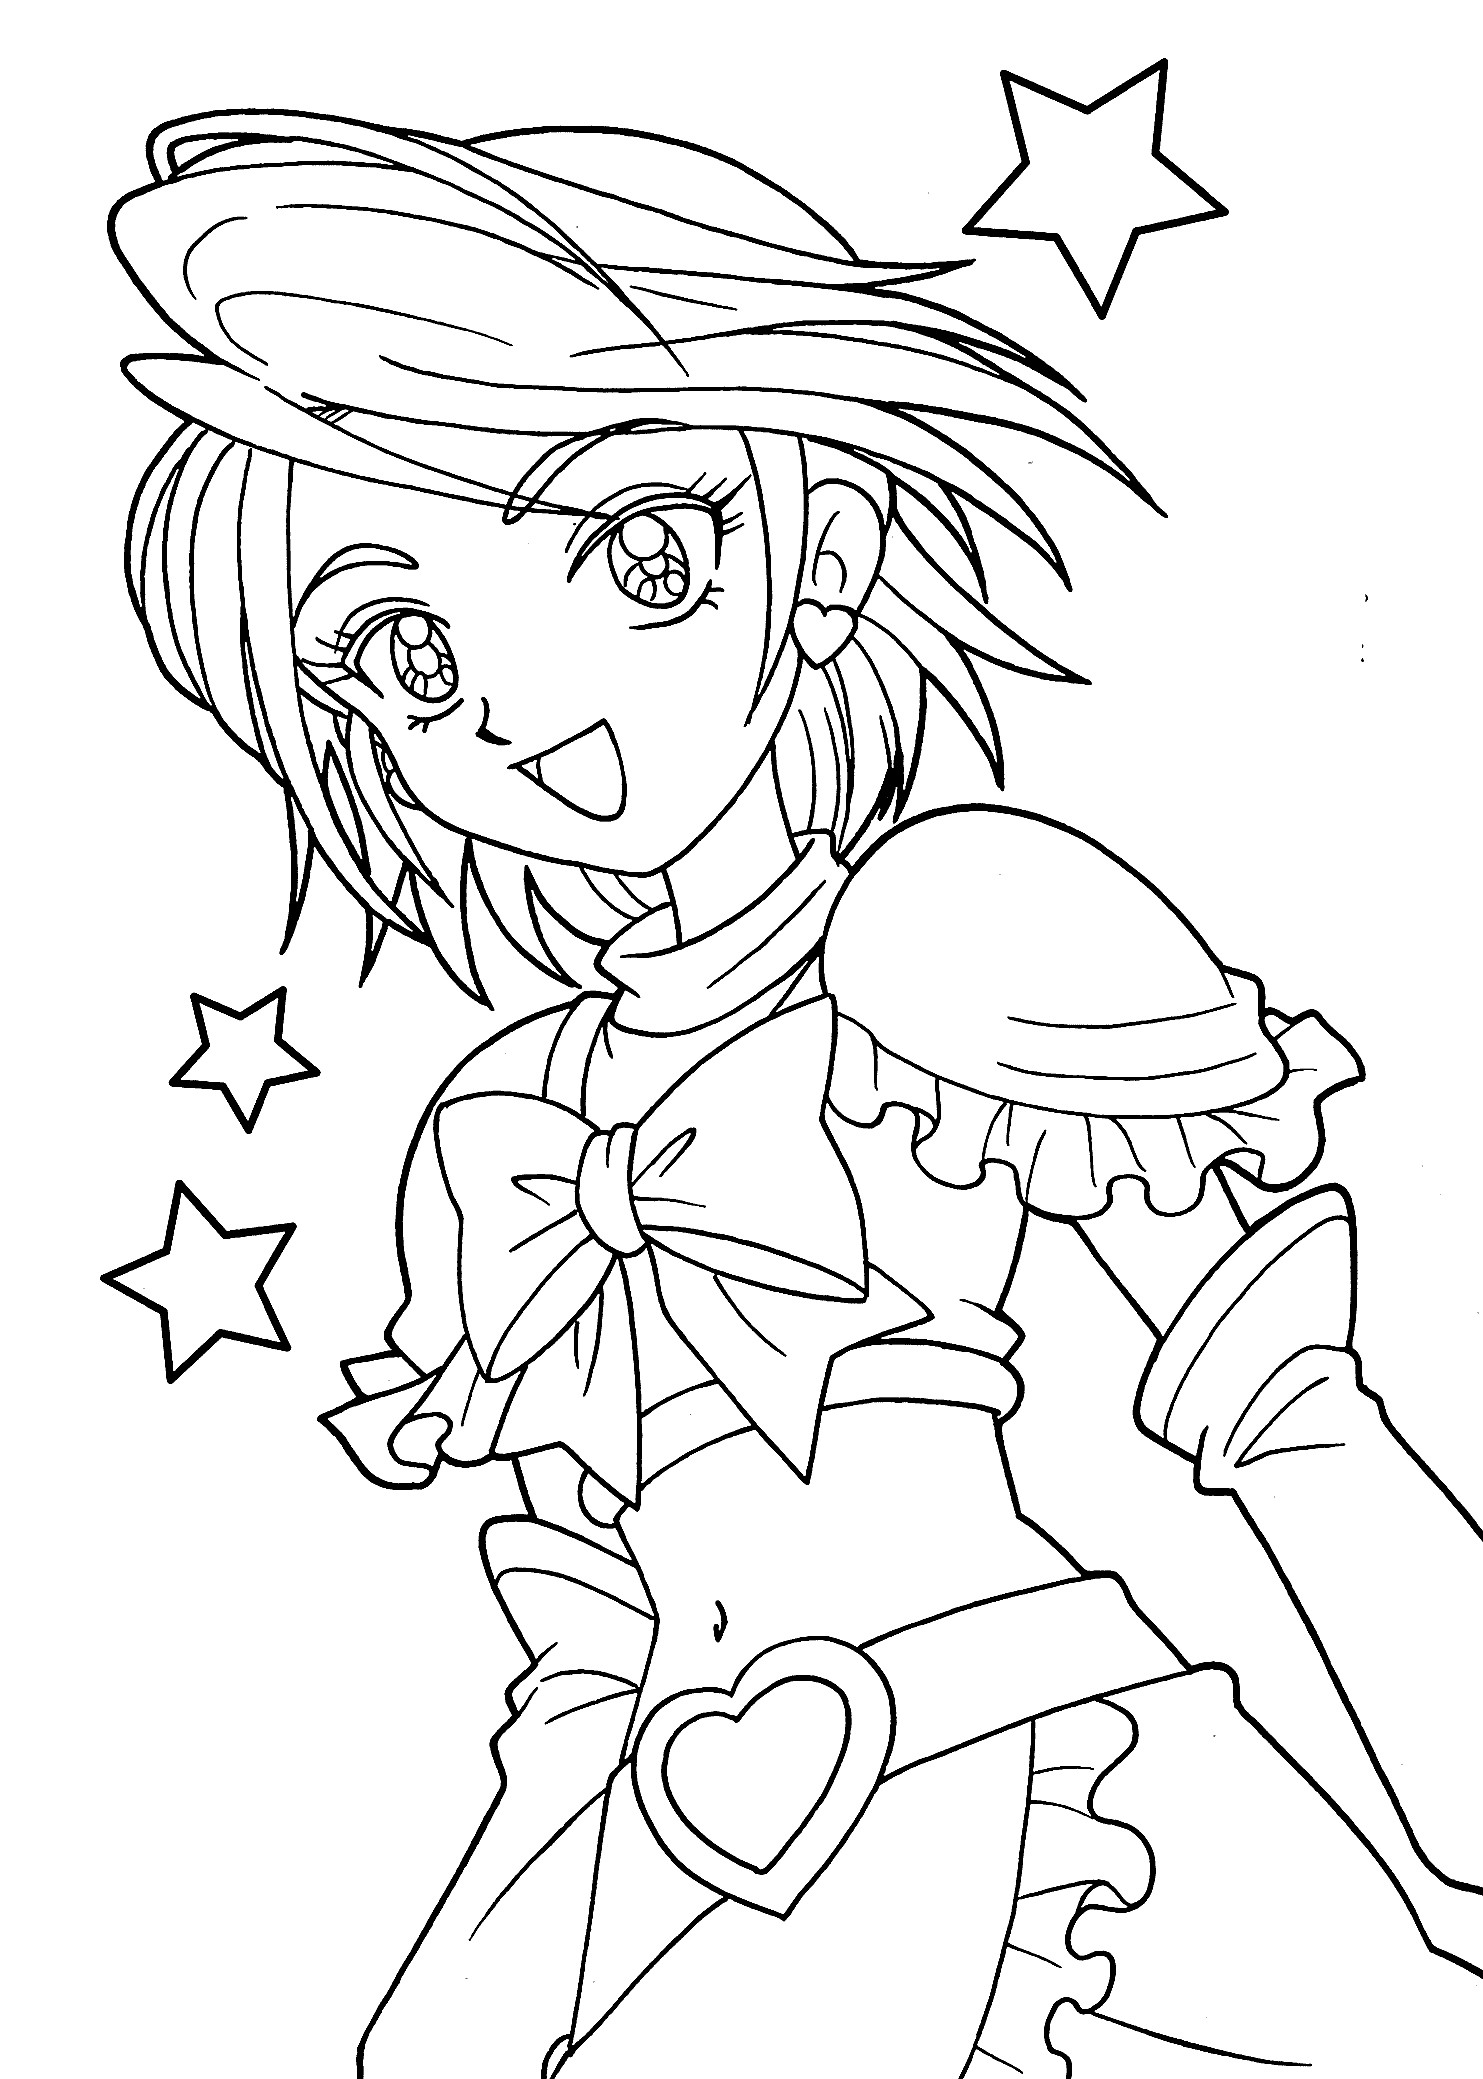 Free Printable Coloring Sheets For Girls
 13 Best of Anime Girl Coloring Pages Bestofcoloring